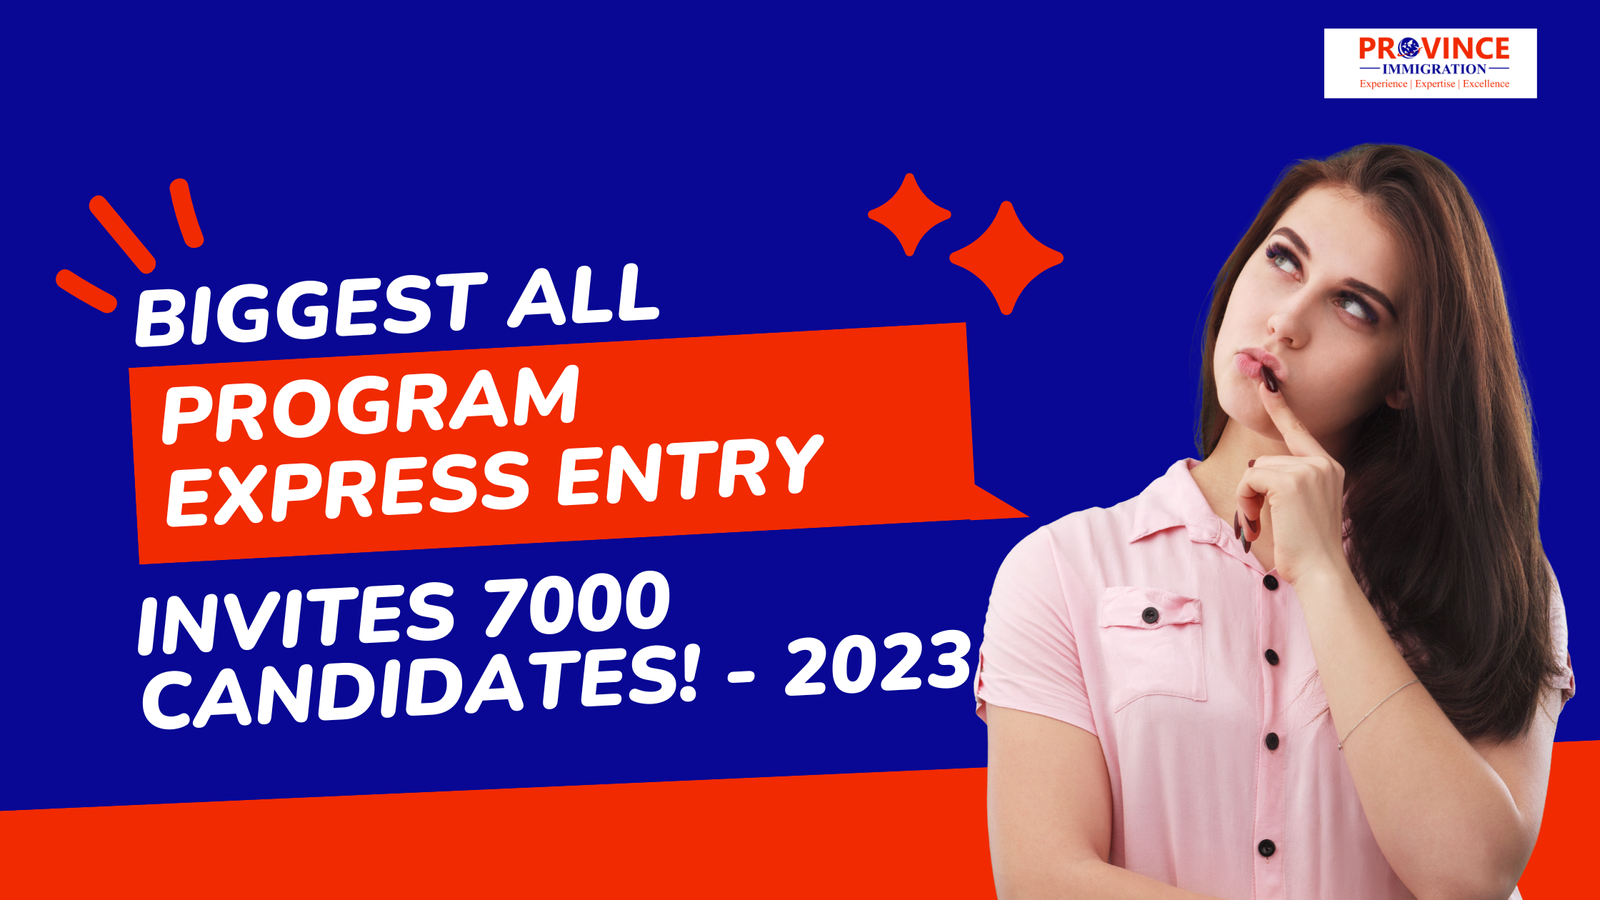 THE BIGGEST ALL-PROGRAM EXPRESS ENTRY INVITES 7000 CANDIDATES! – 2023